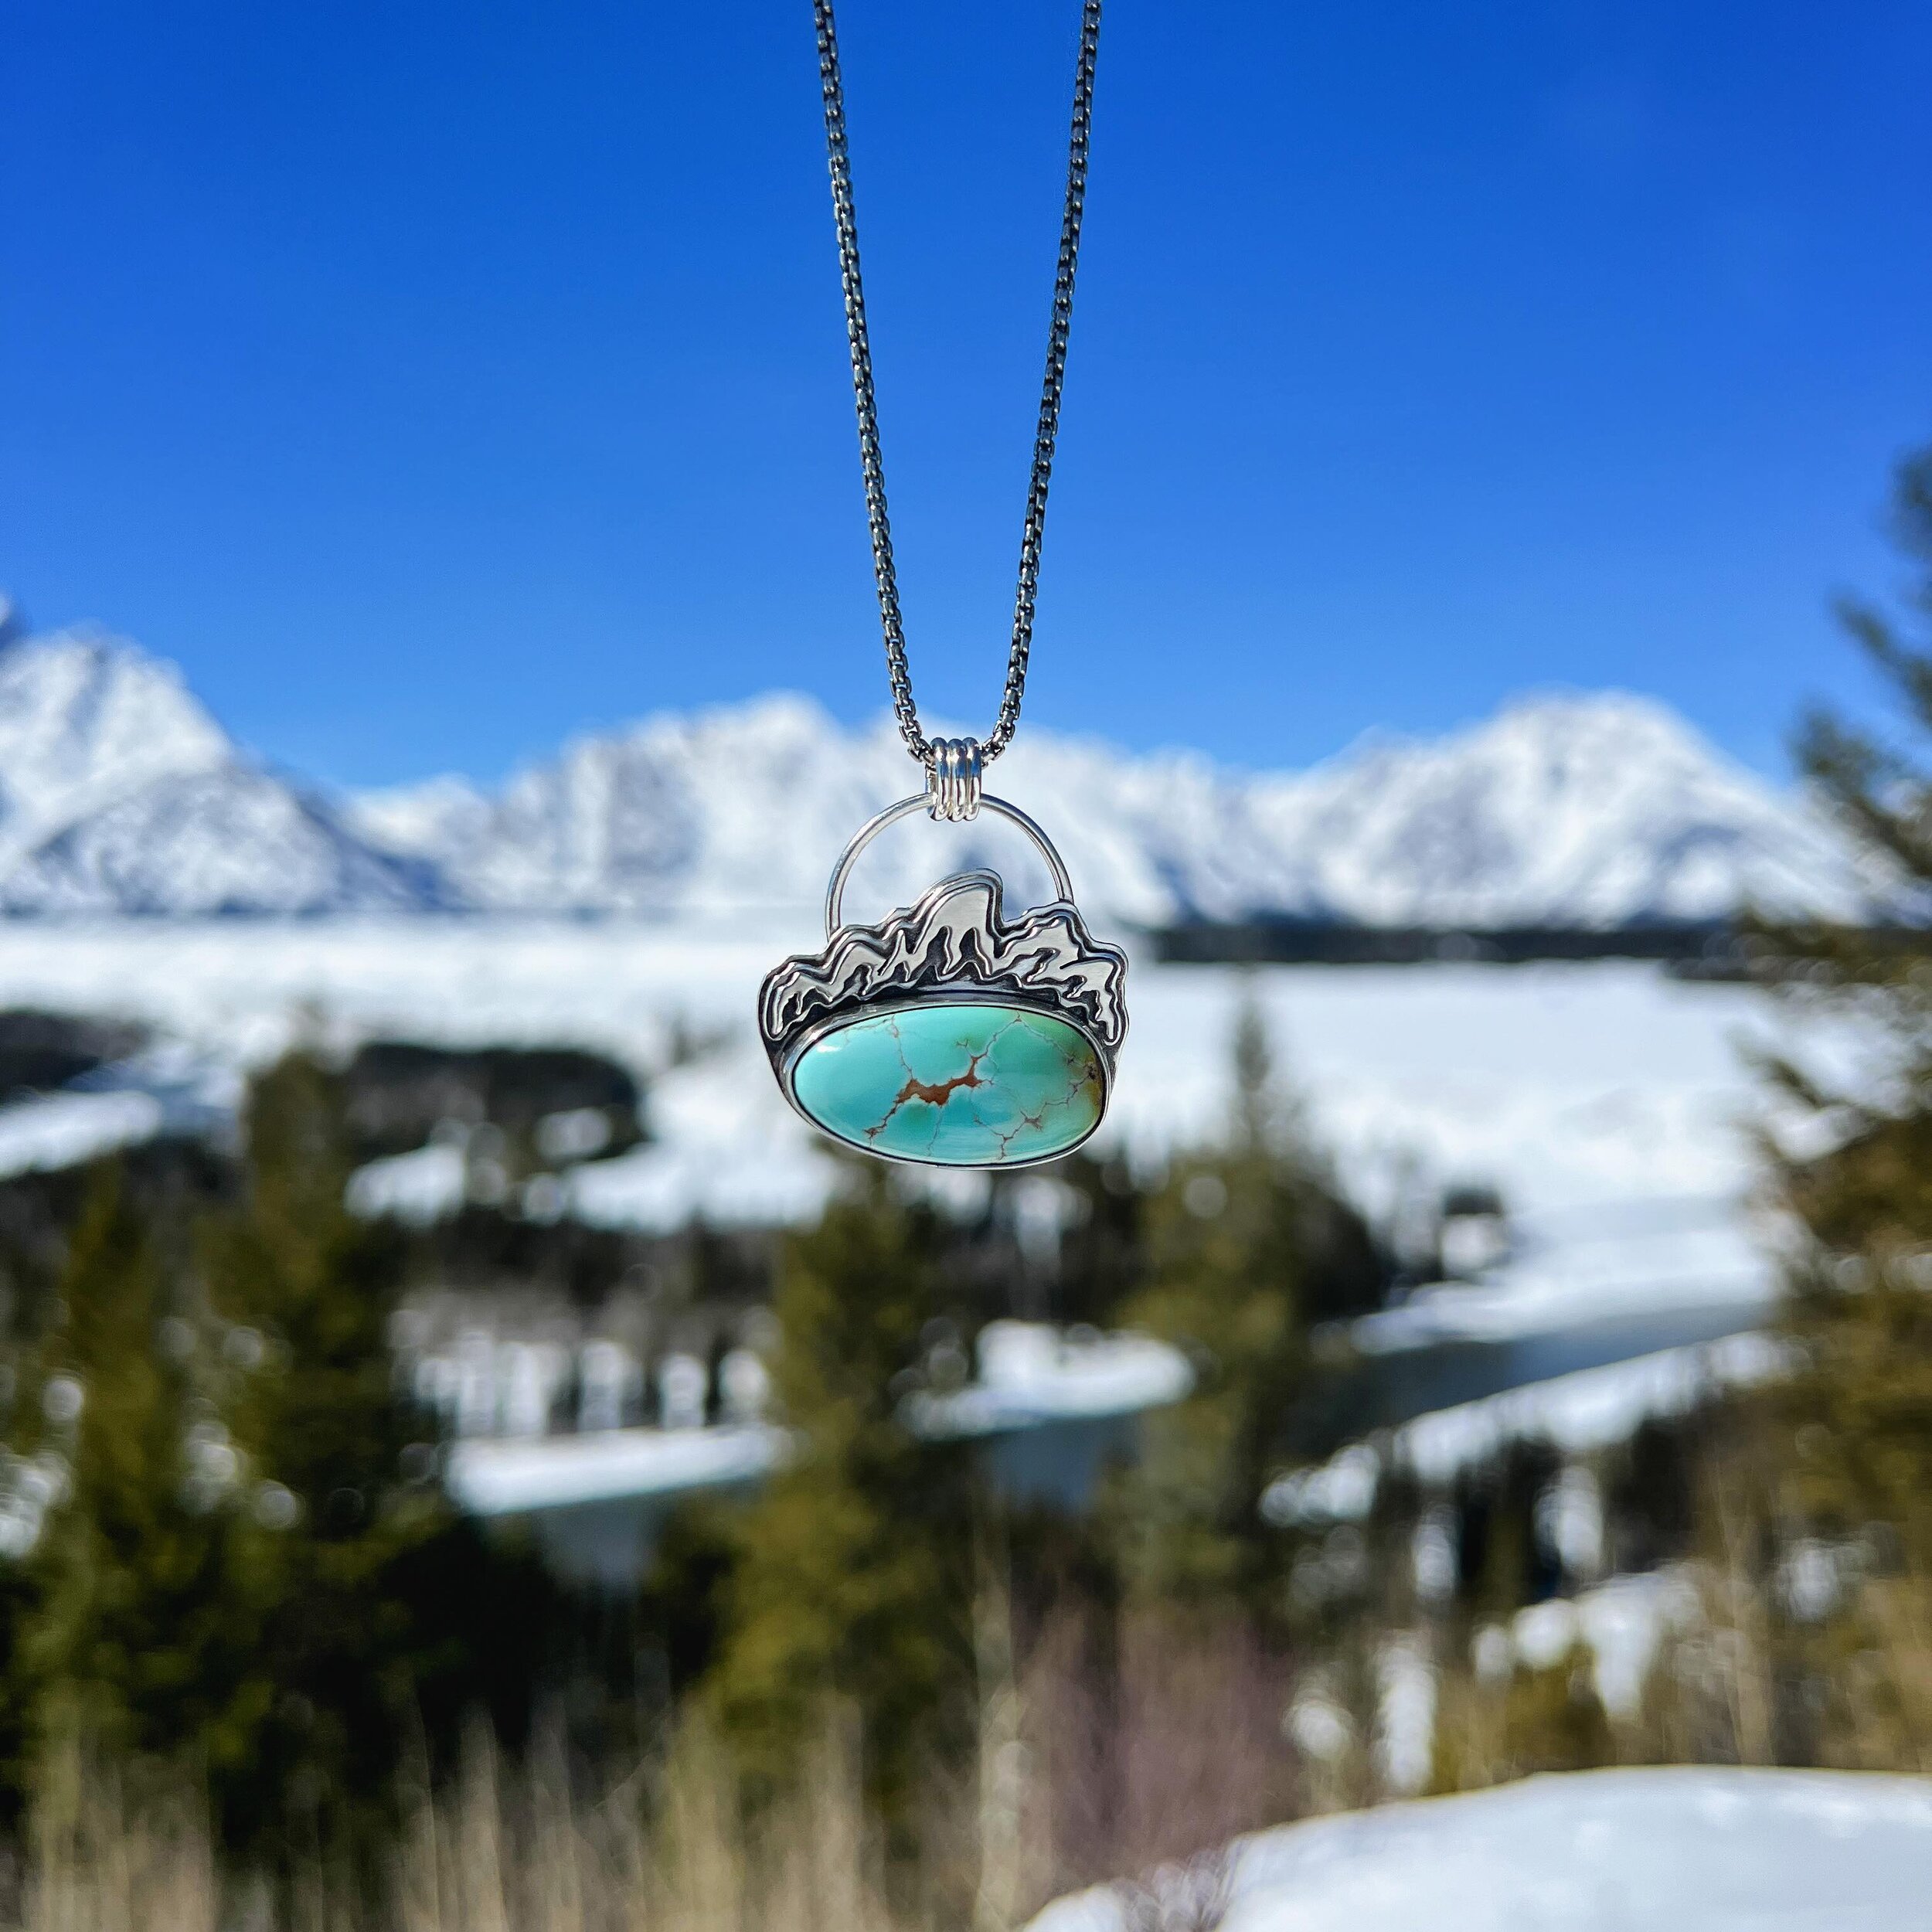 Gorgeous Teton Range pendant featuring high grade Thunderbird Turquoise. 🤩 This babe will be available this Saturday the 23rd at 9:30am MST, link in bio.